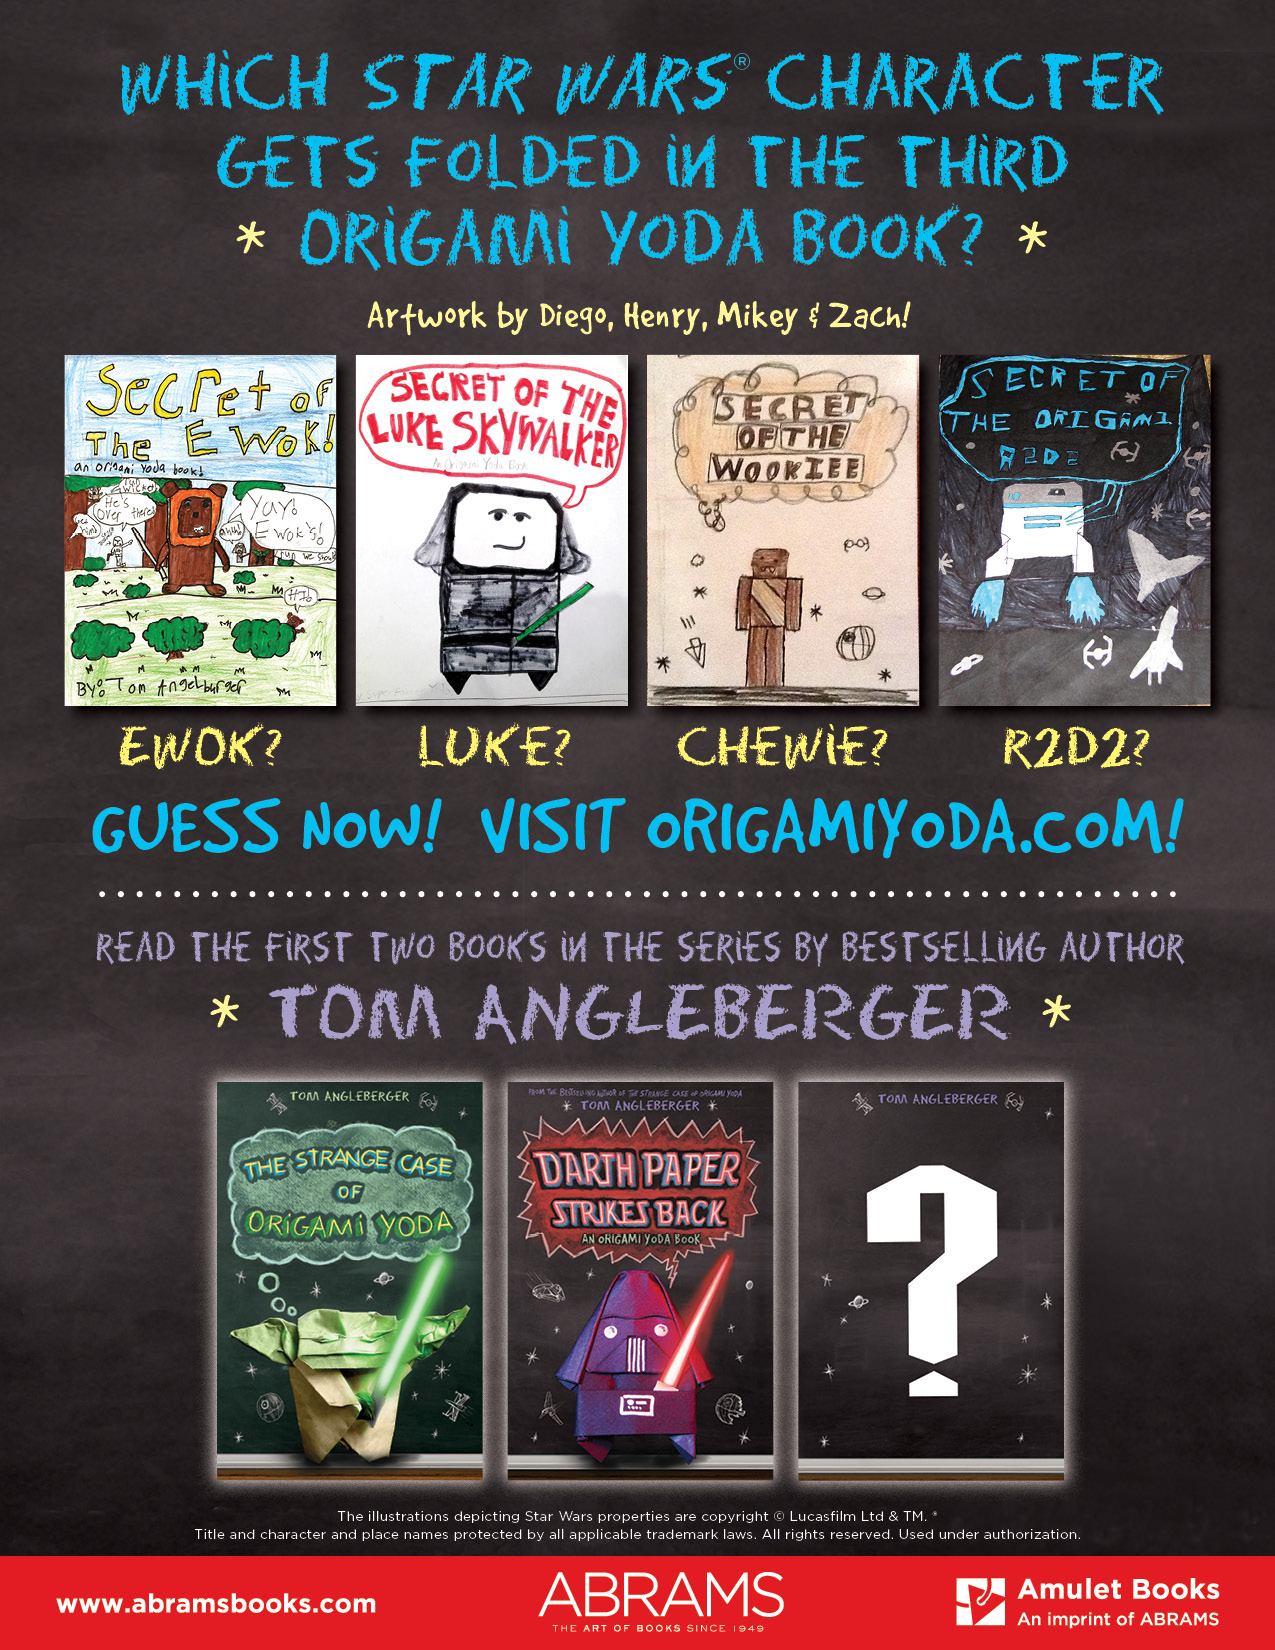 Origami Yoda The Movie Origami Yoda 3 Who Will Be The Cover Star Make Your Guess Now